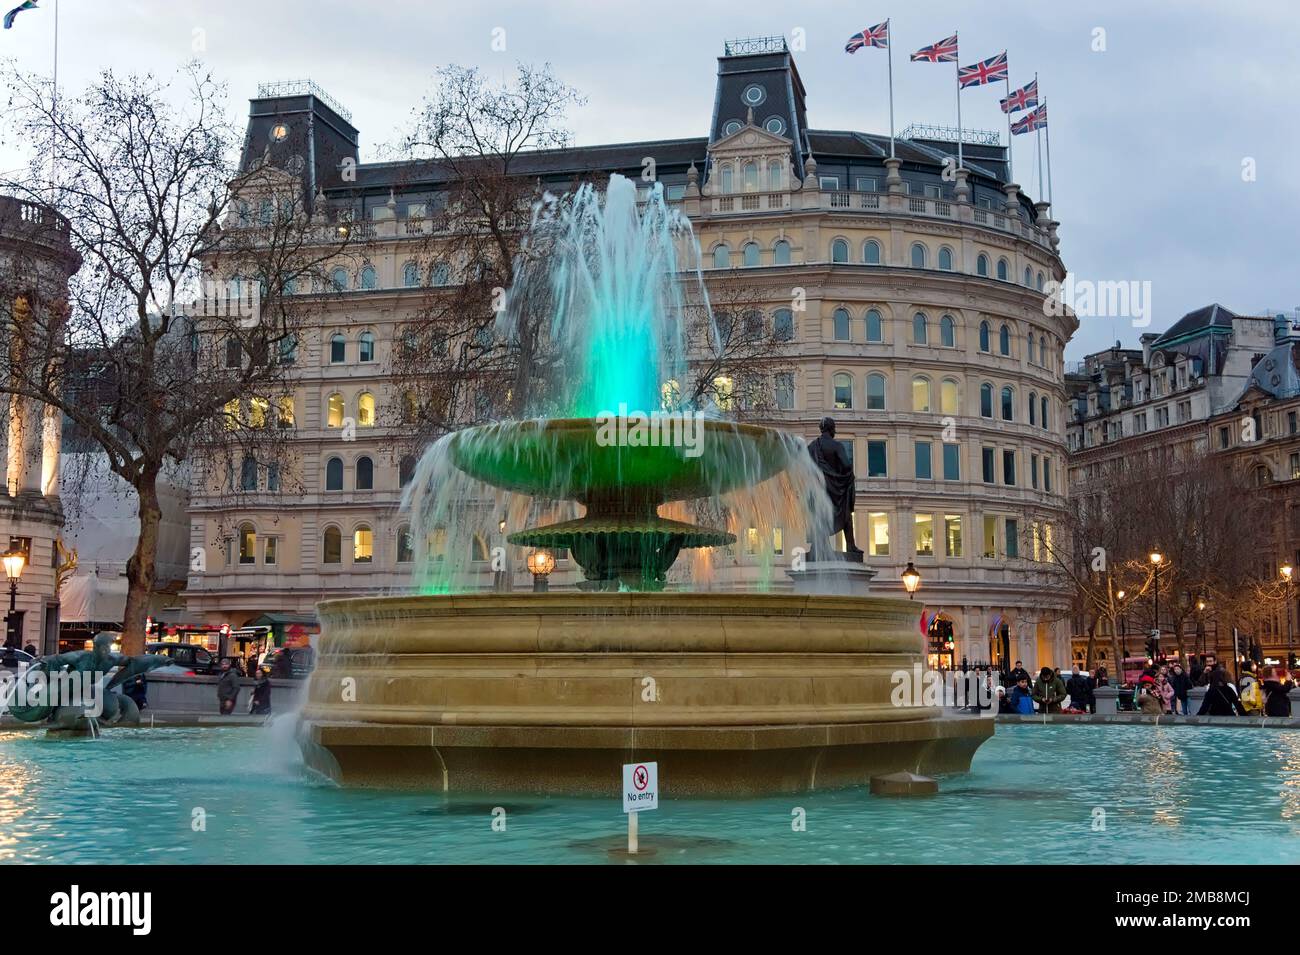 One of the famous illuminated water fountains at iTrafalgar Square, Stock Photo